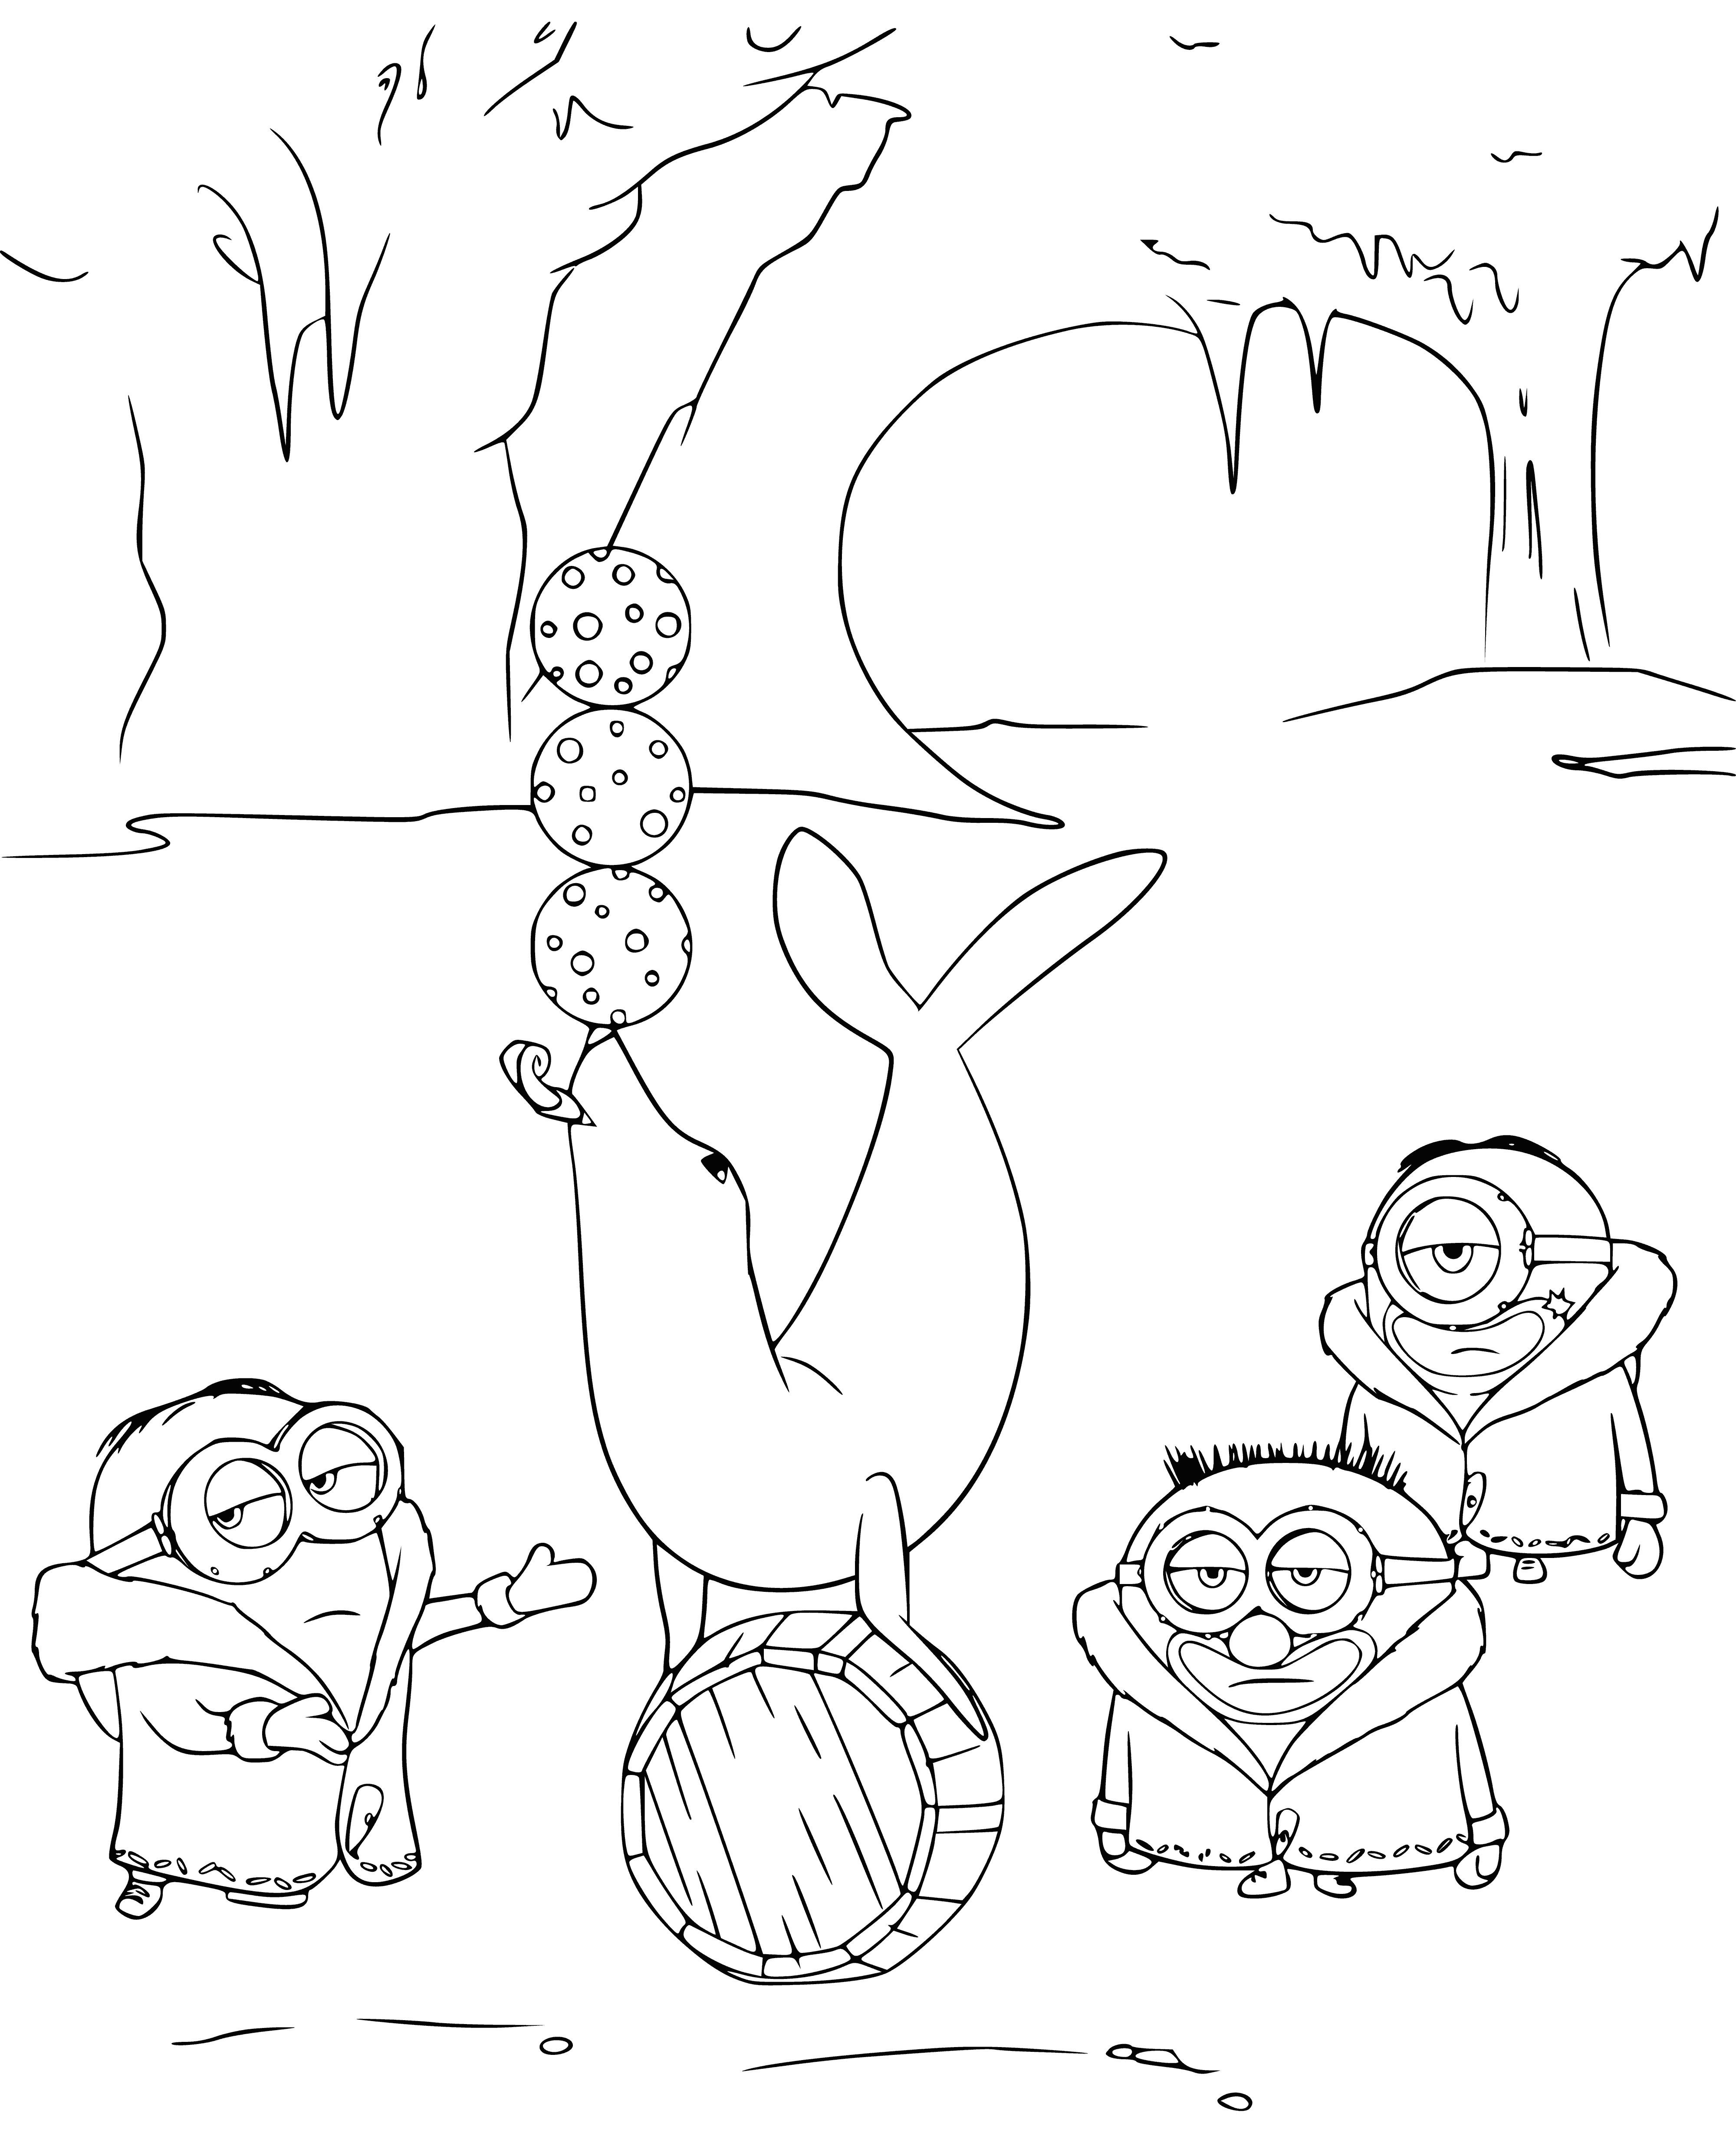 coloring page: Three snow-clad minions hold star-topped string and a "North Pole" sign.